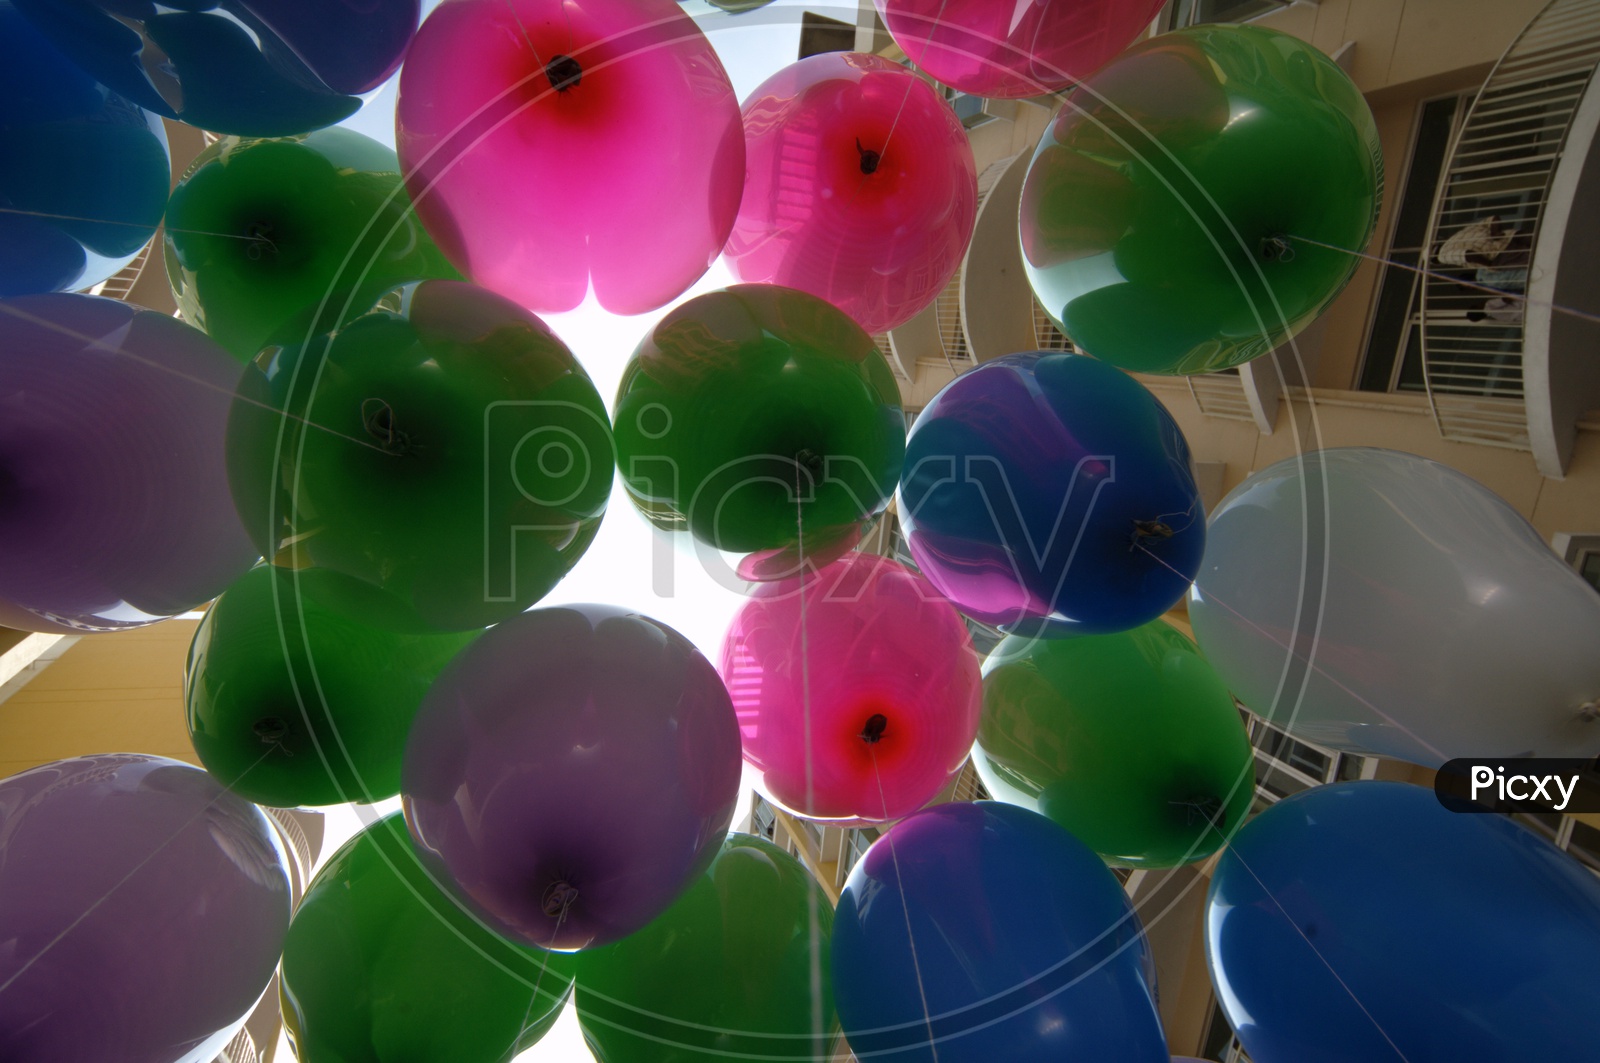 View of Colourful balloons from the bottom